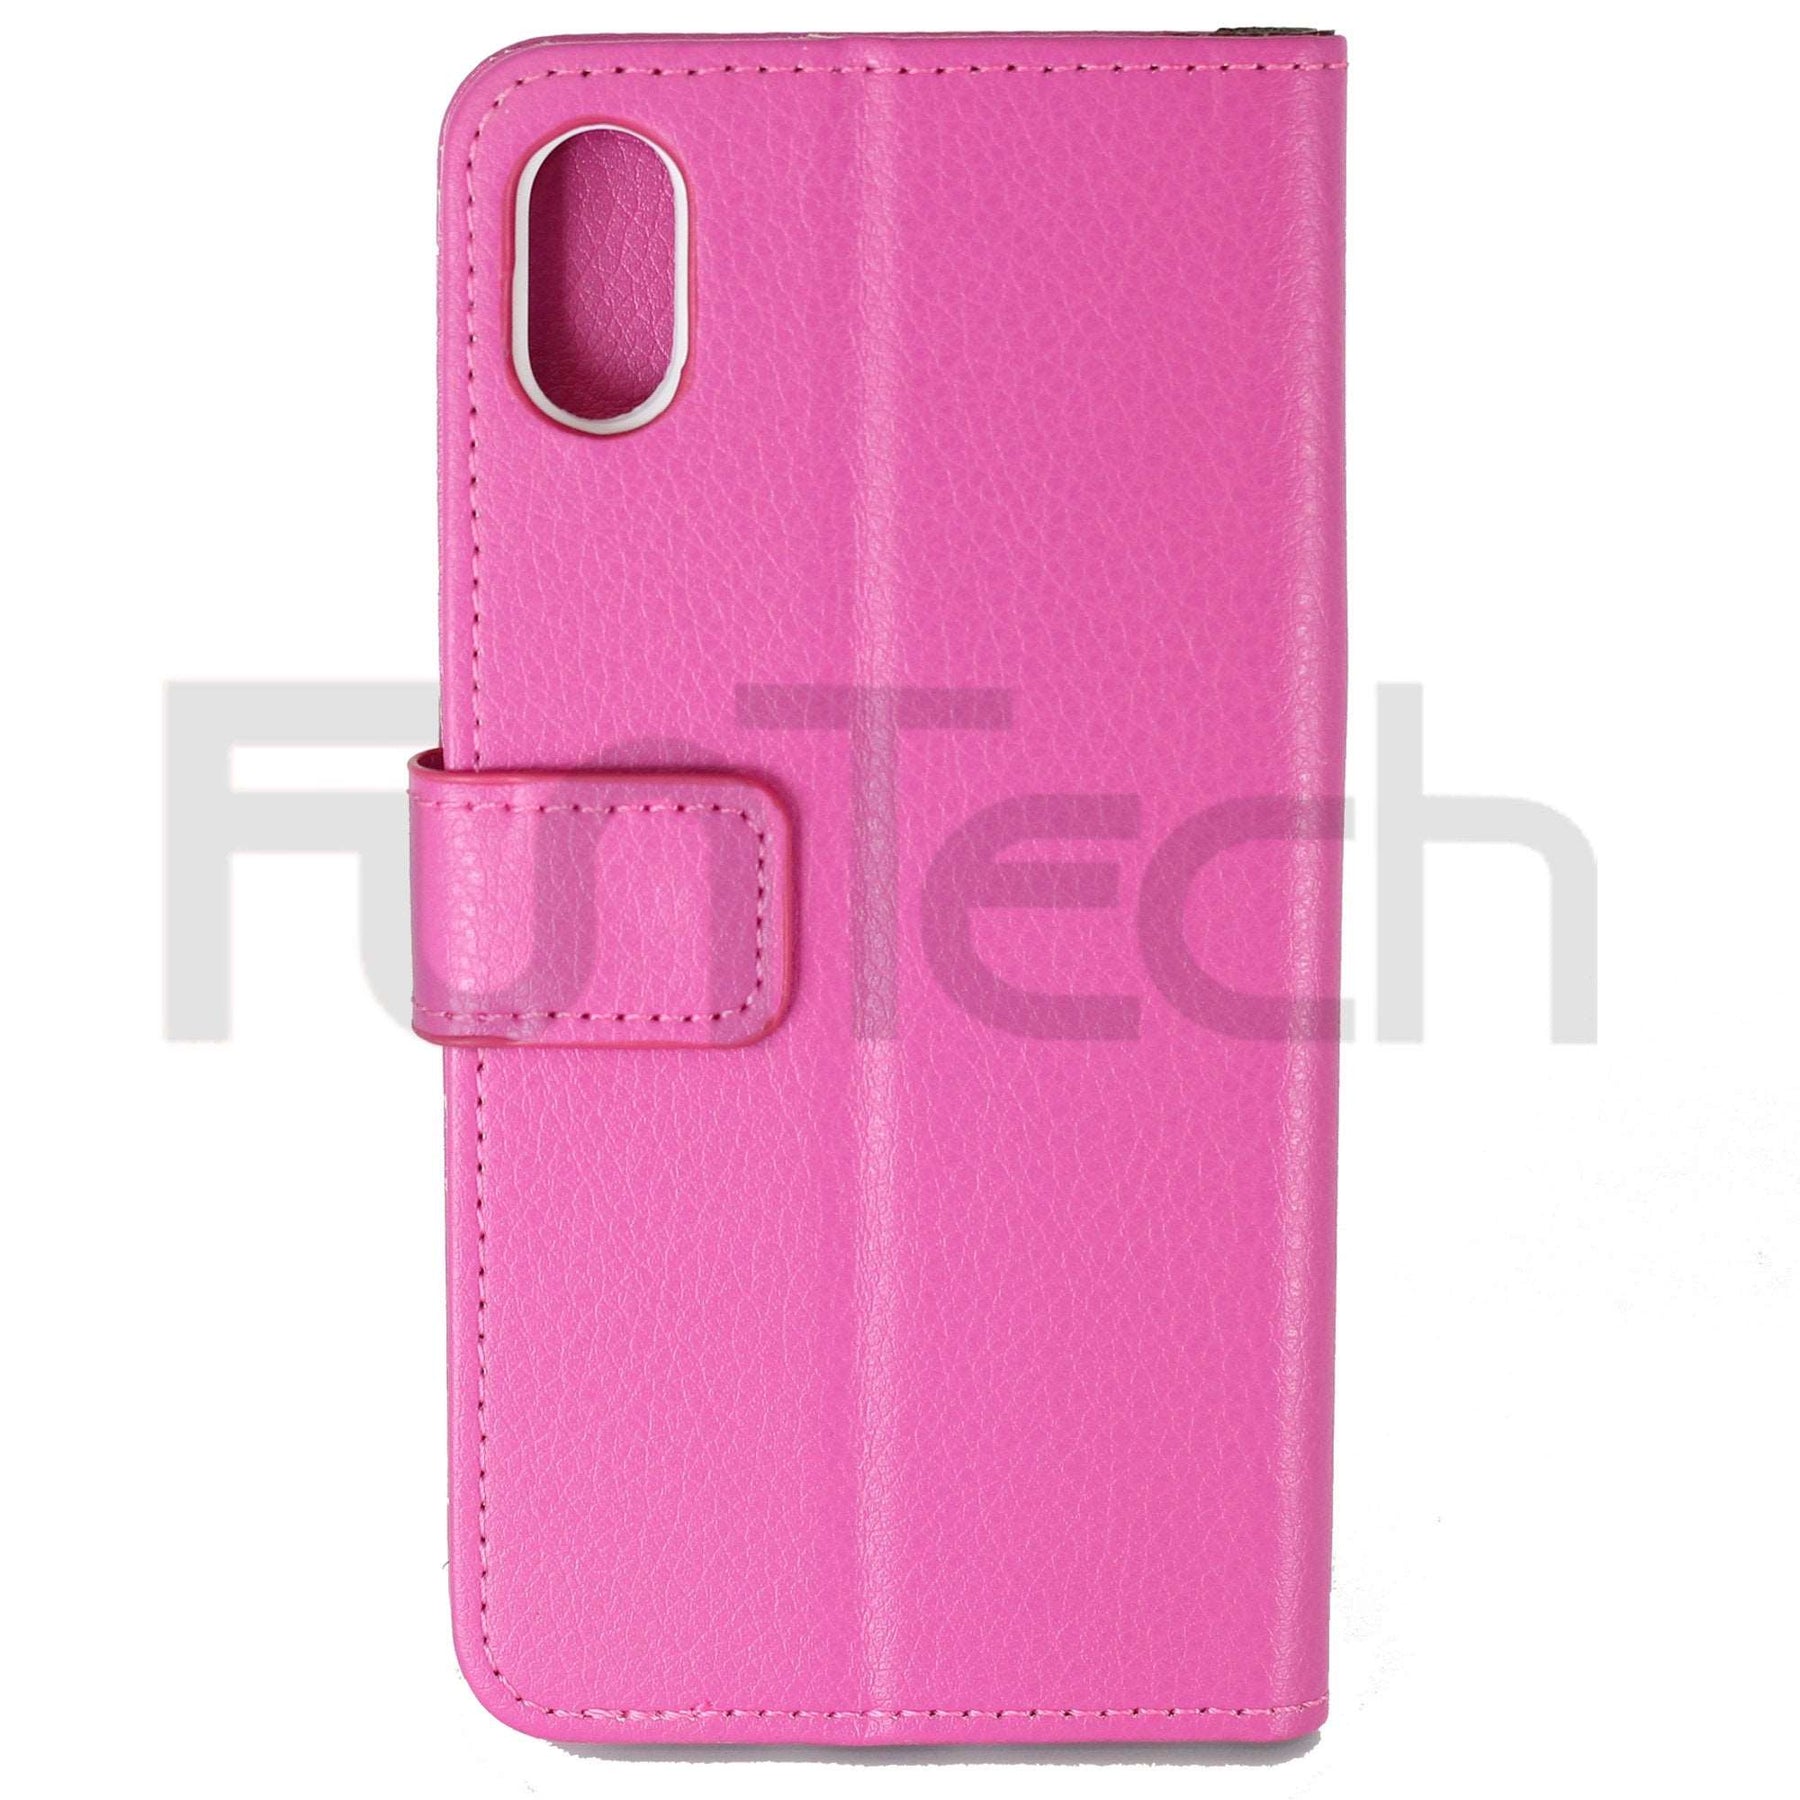 Apple iPhone X Leather Case Pink